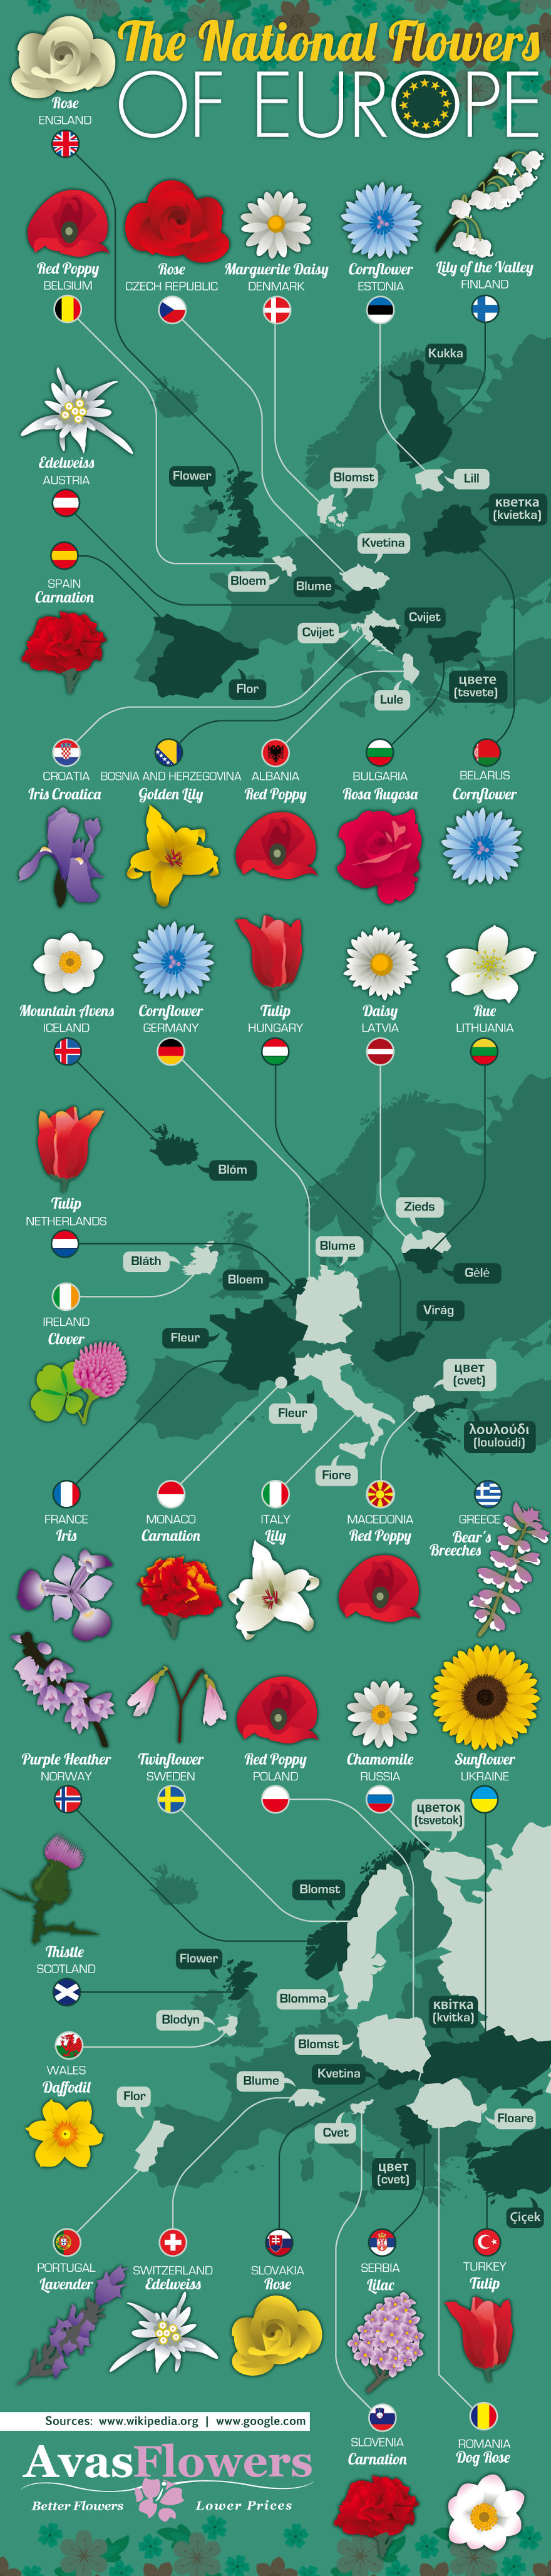 Found This Cool Map Of European National Flowers